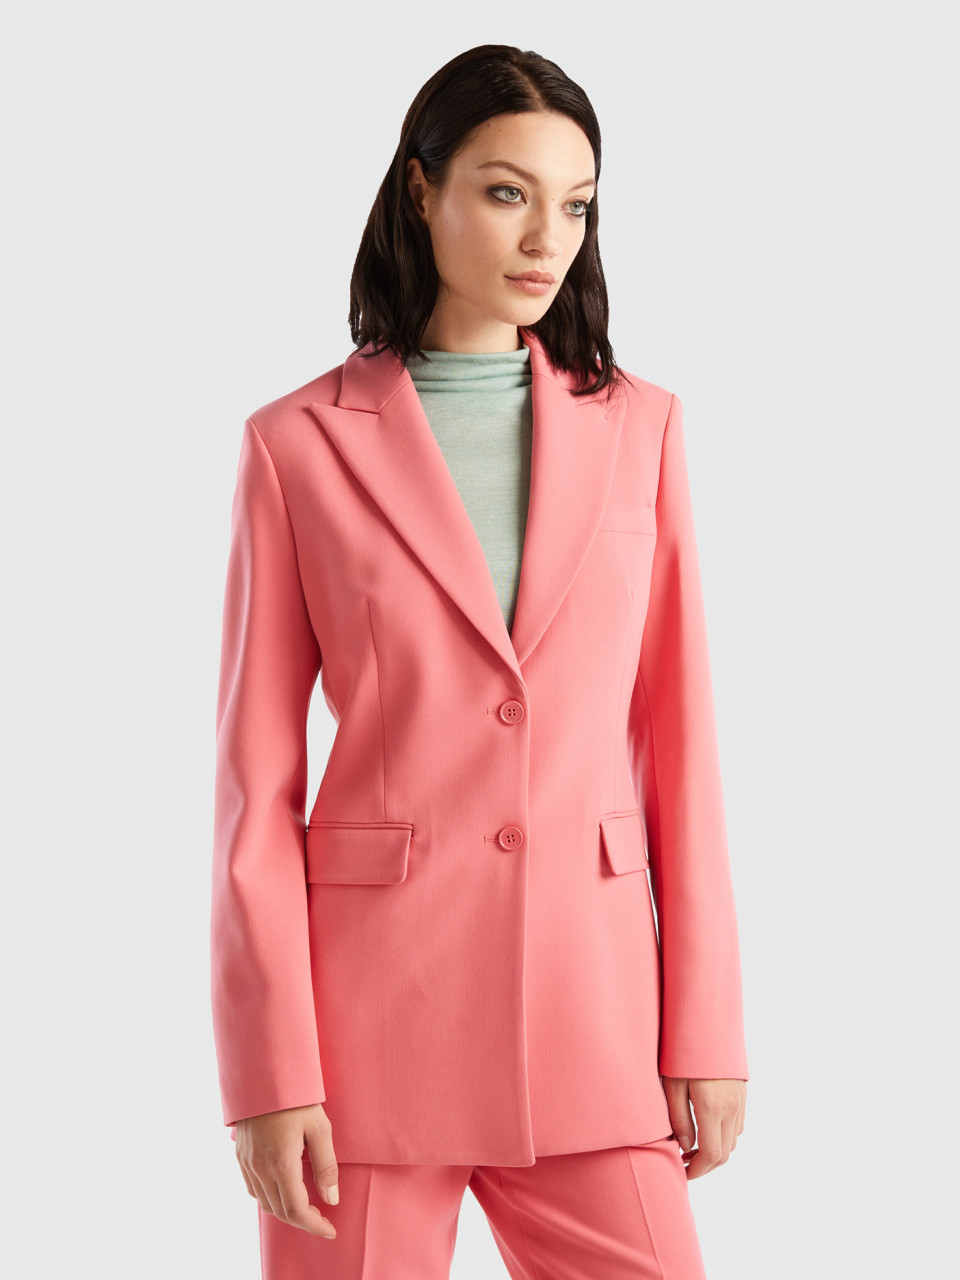 Benetton, Fitted Jacket, Pink, Women